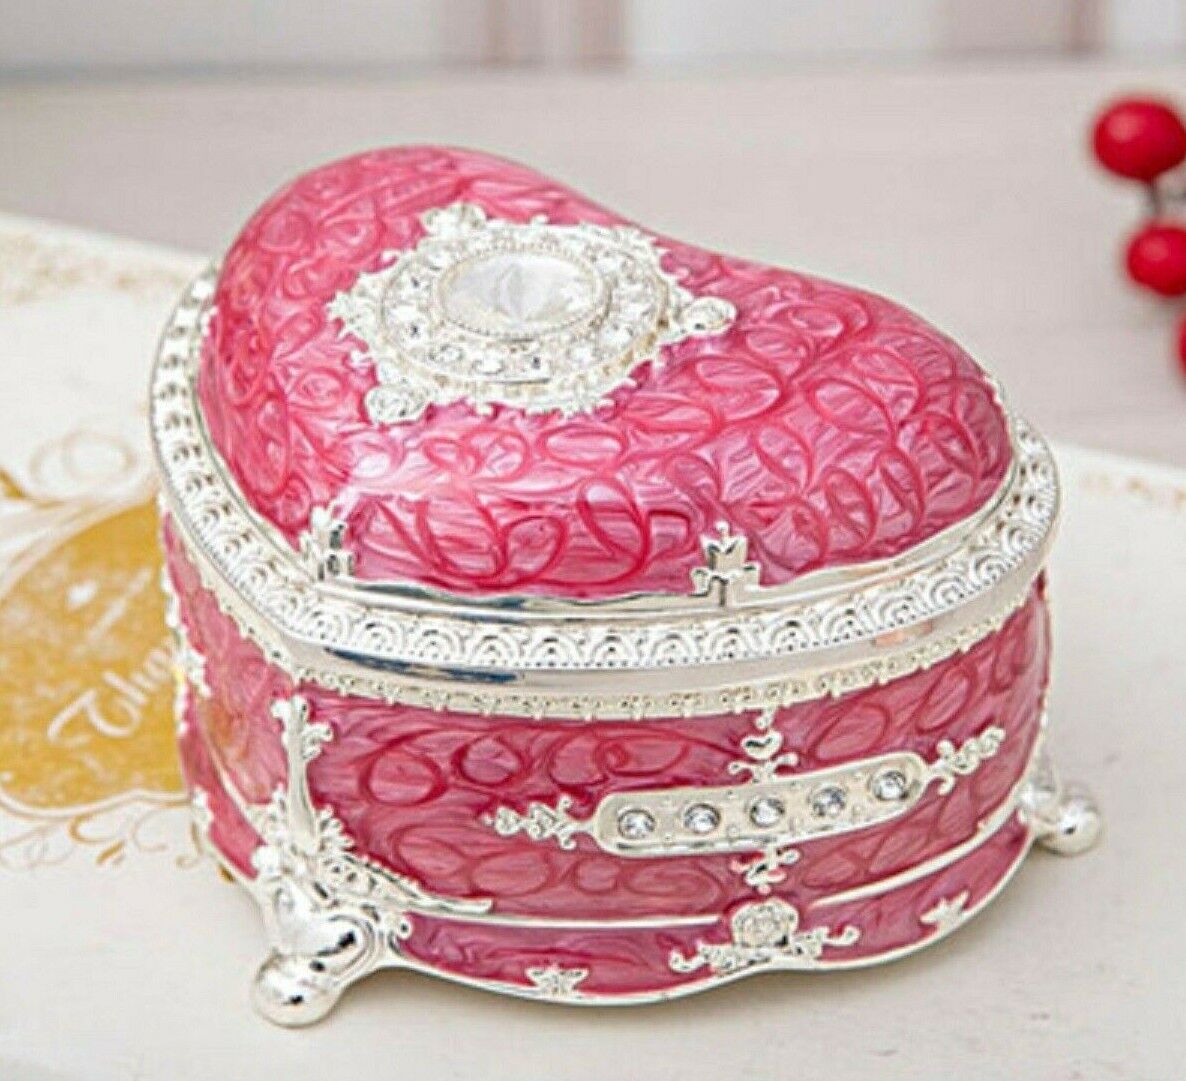 HEART SHAPE IN ROSE TIN ALLOY WIND UP MUSIC BOX : RAINBOW CONNECTION